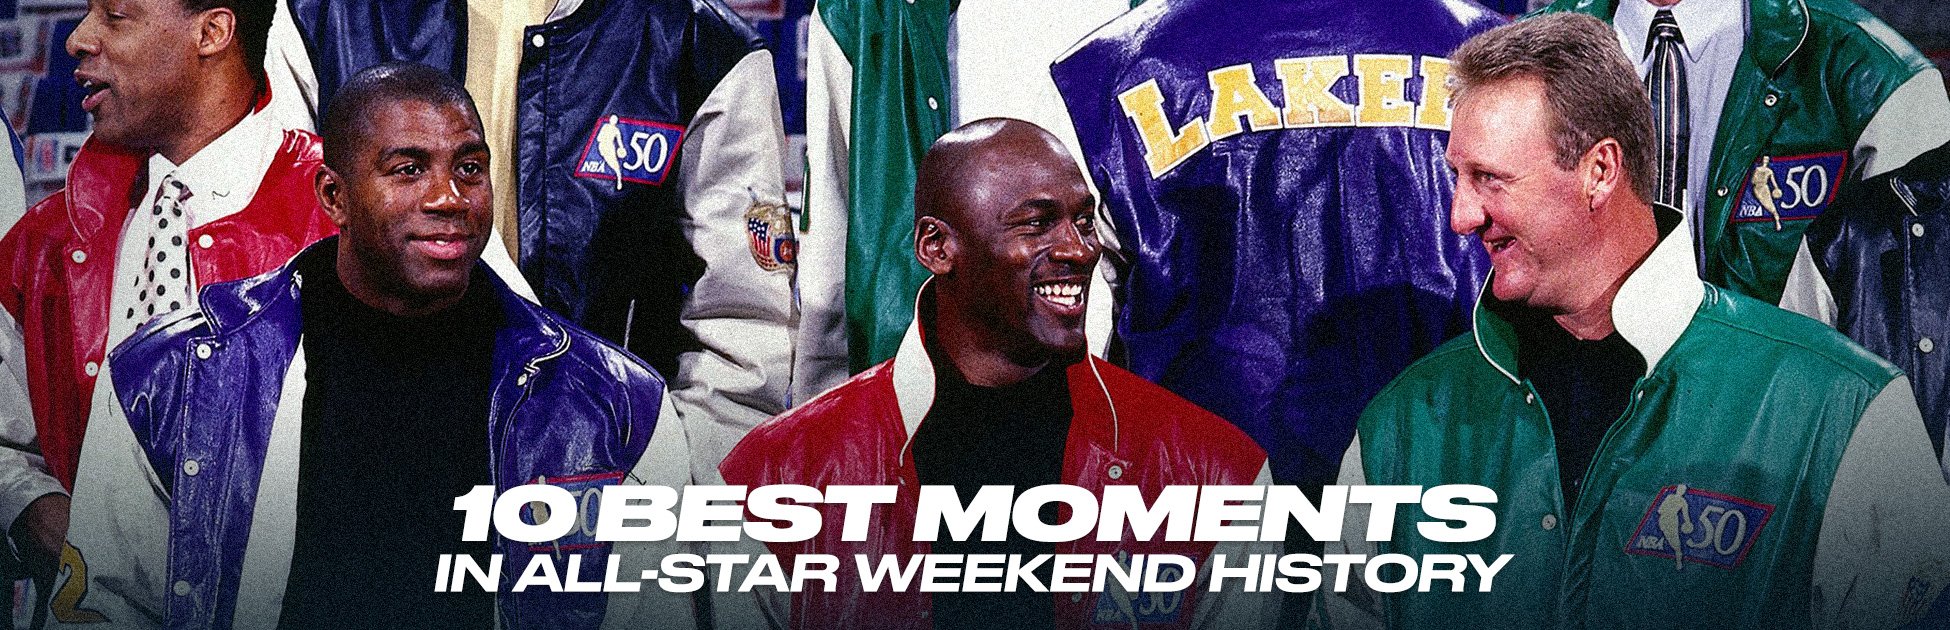 1993 NBA All-Star Game a special moment for Utah - The Salt Lake